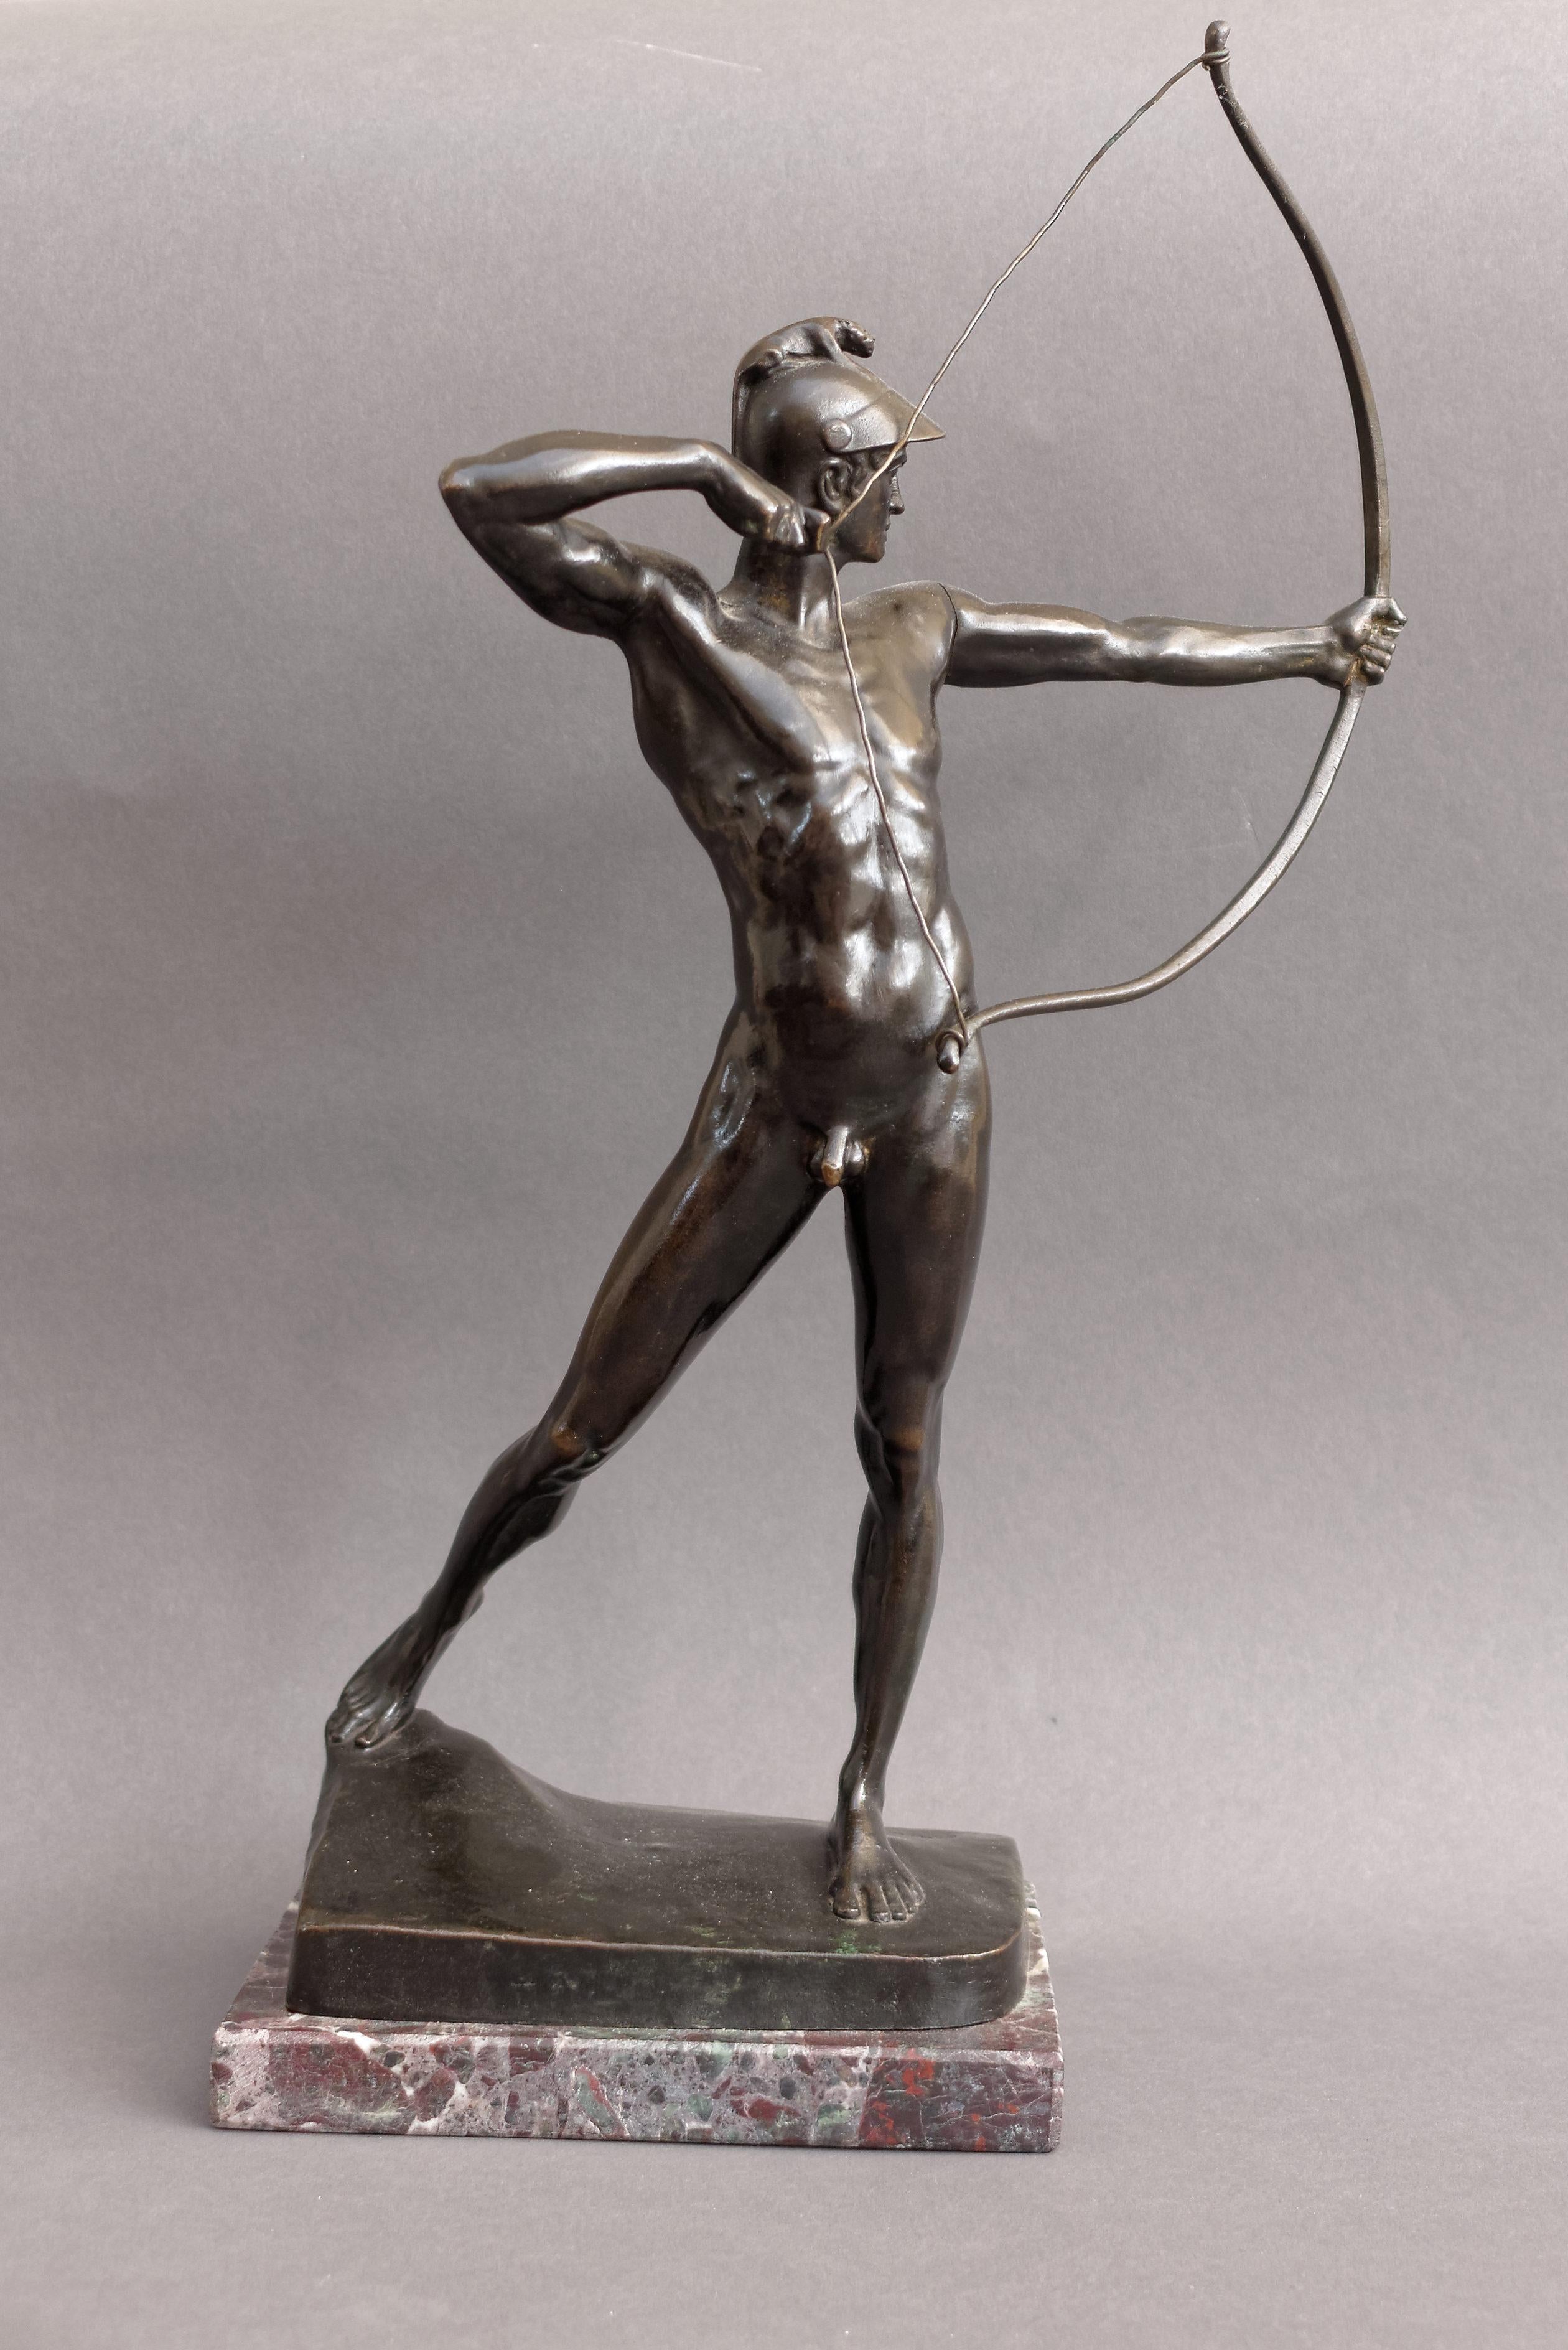 Ernst Moritz Geyger, German (1861-1941). A small bronze figure of 'The Archer', the standing naked figure wearing a helmet, drawing a bow, raised on a naturalistically cast base, signed and dated: E.M. GEYGER FEC. and inscribed by the foundry: 